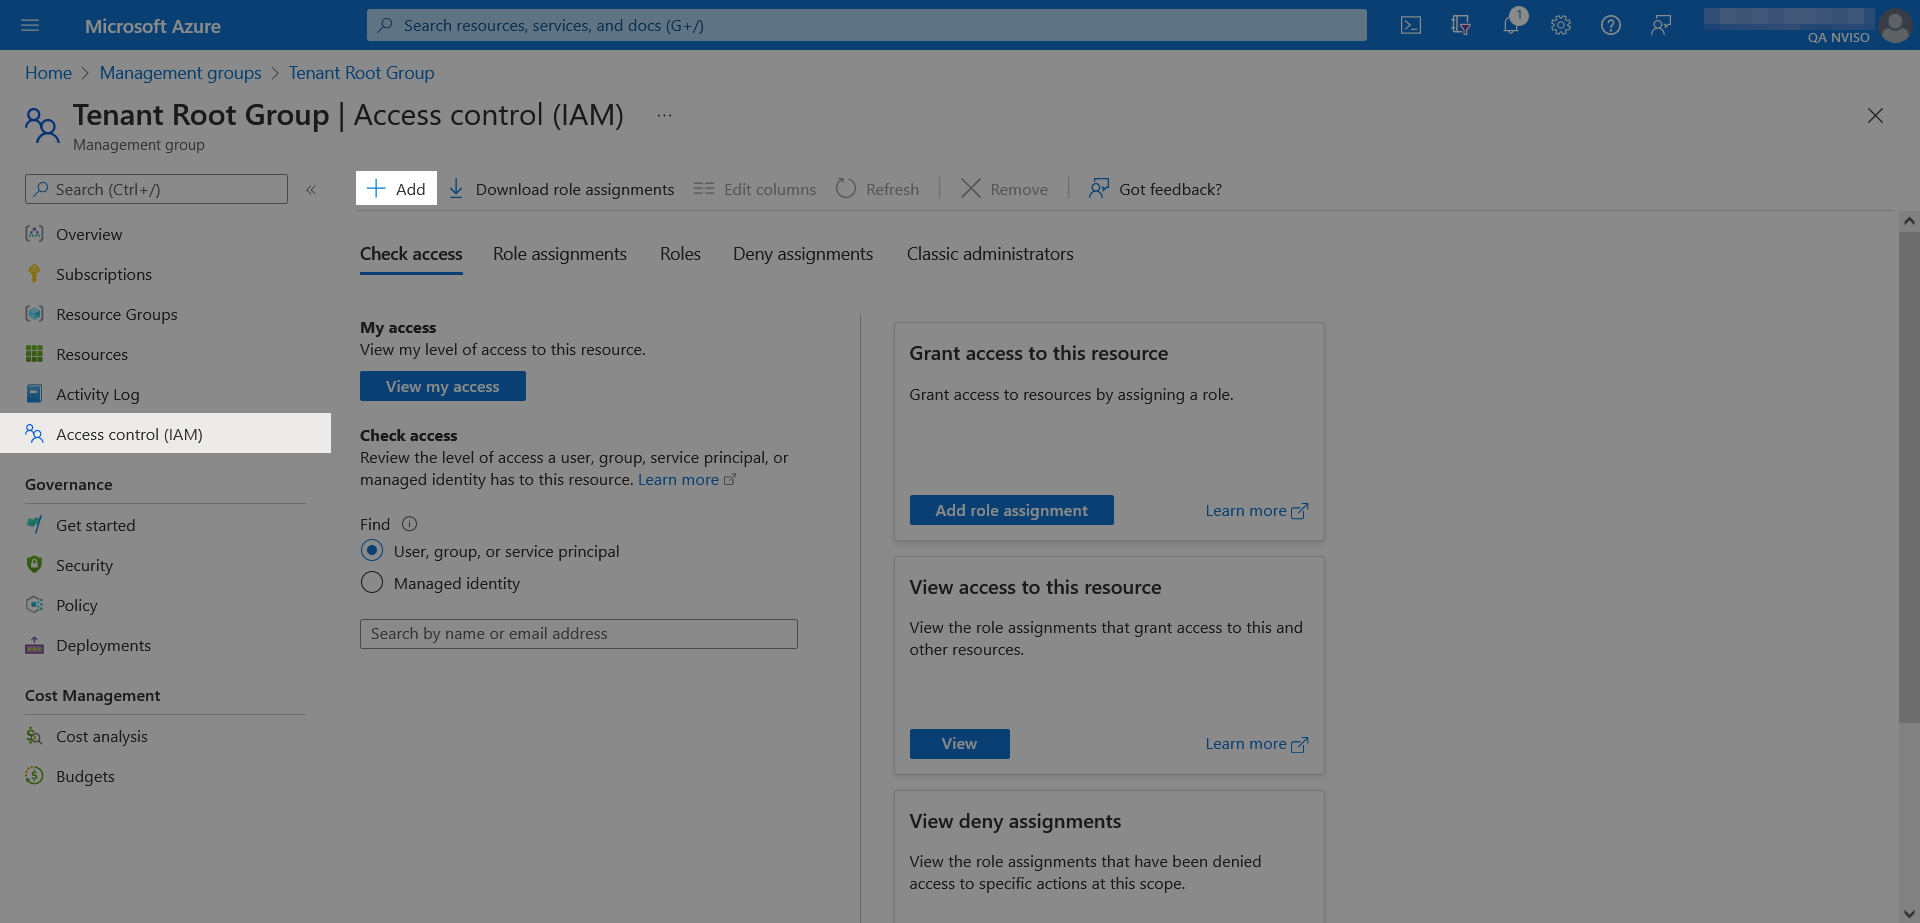 The tenant root group&rsquo;s access control (IAM) in the Azure portal.